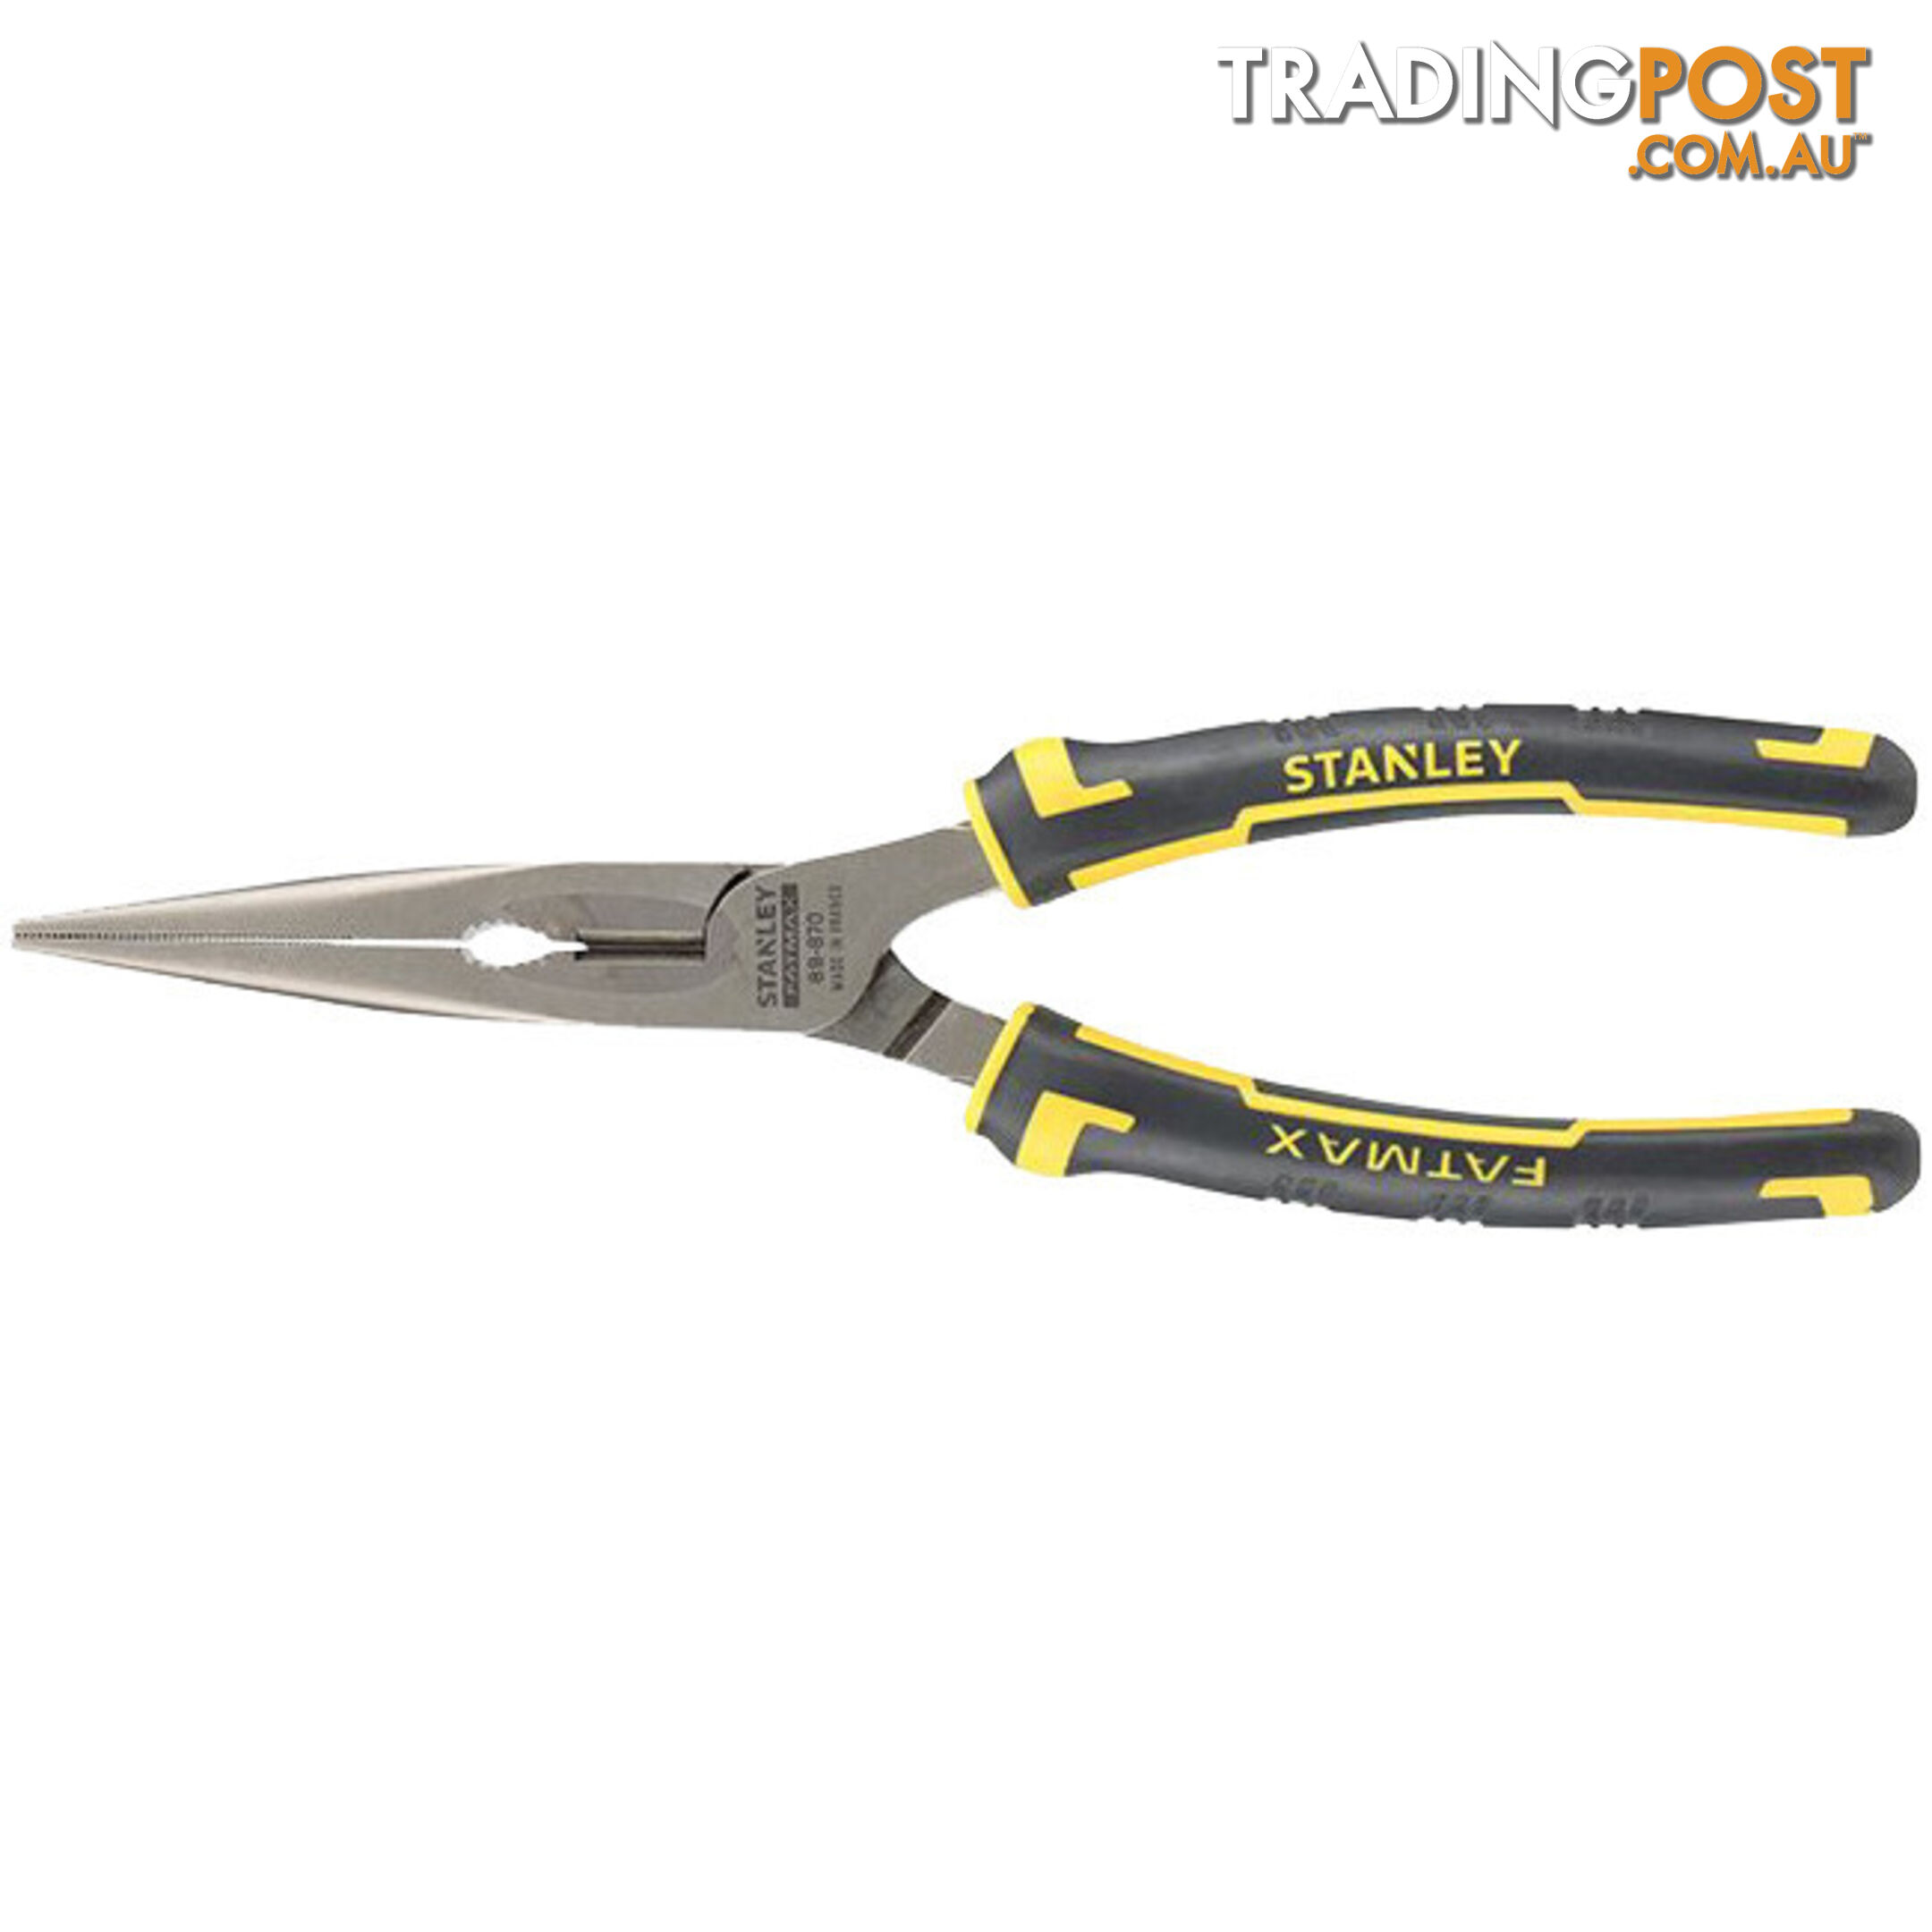 89-870 200MM LONG NOSE PLIER MADE IN FRANCE